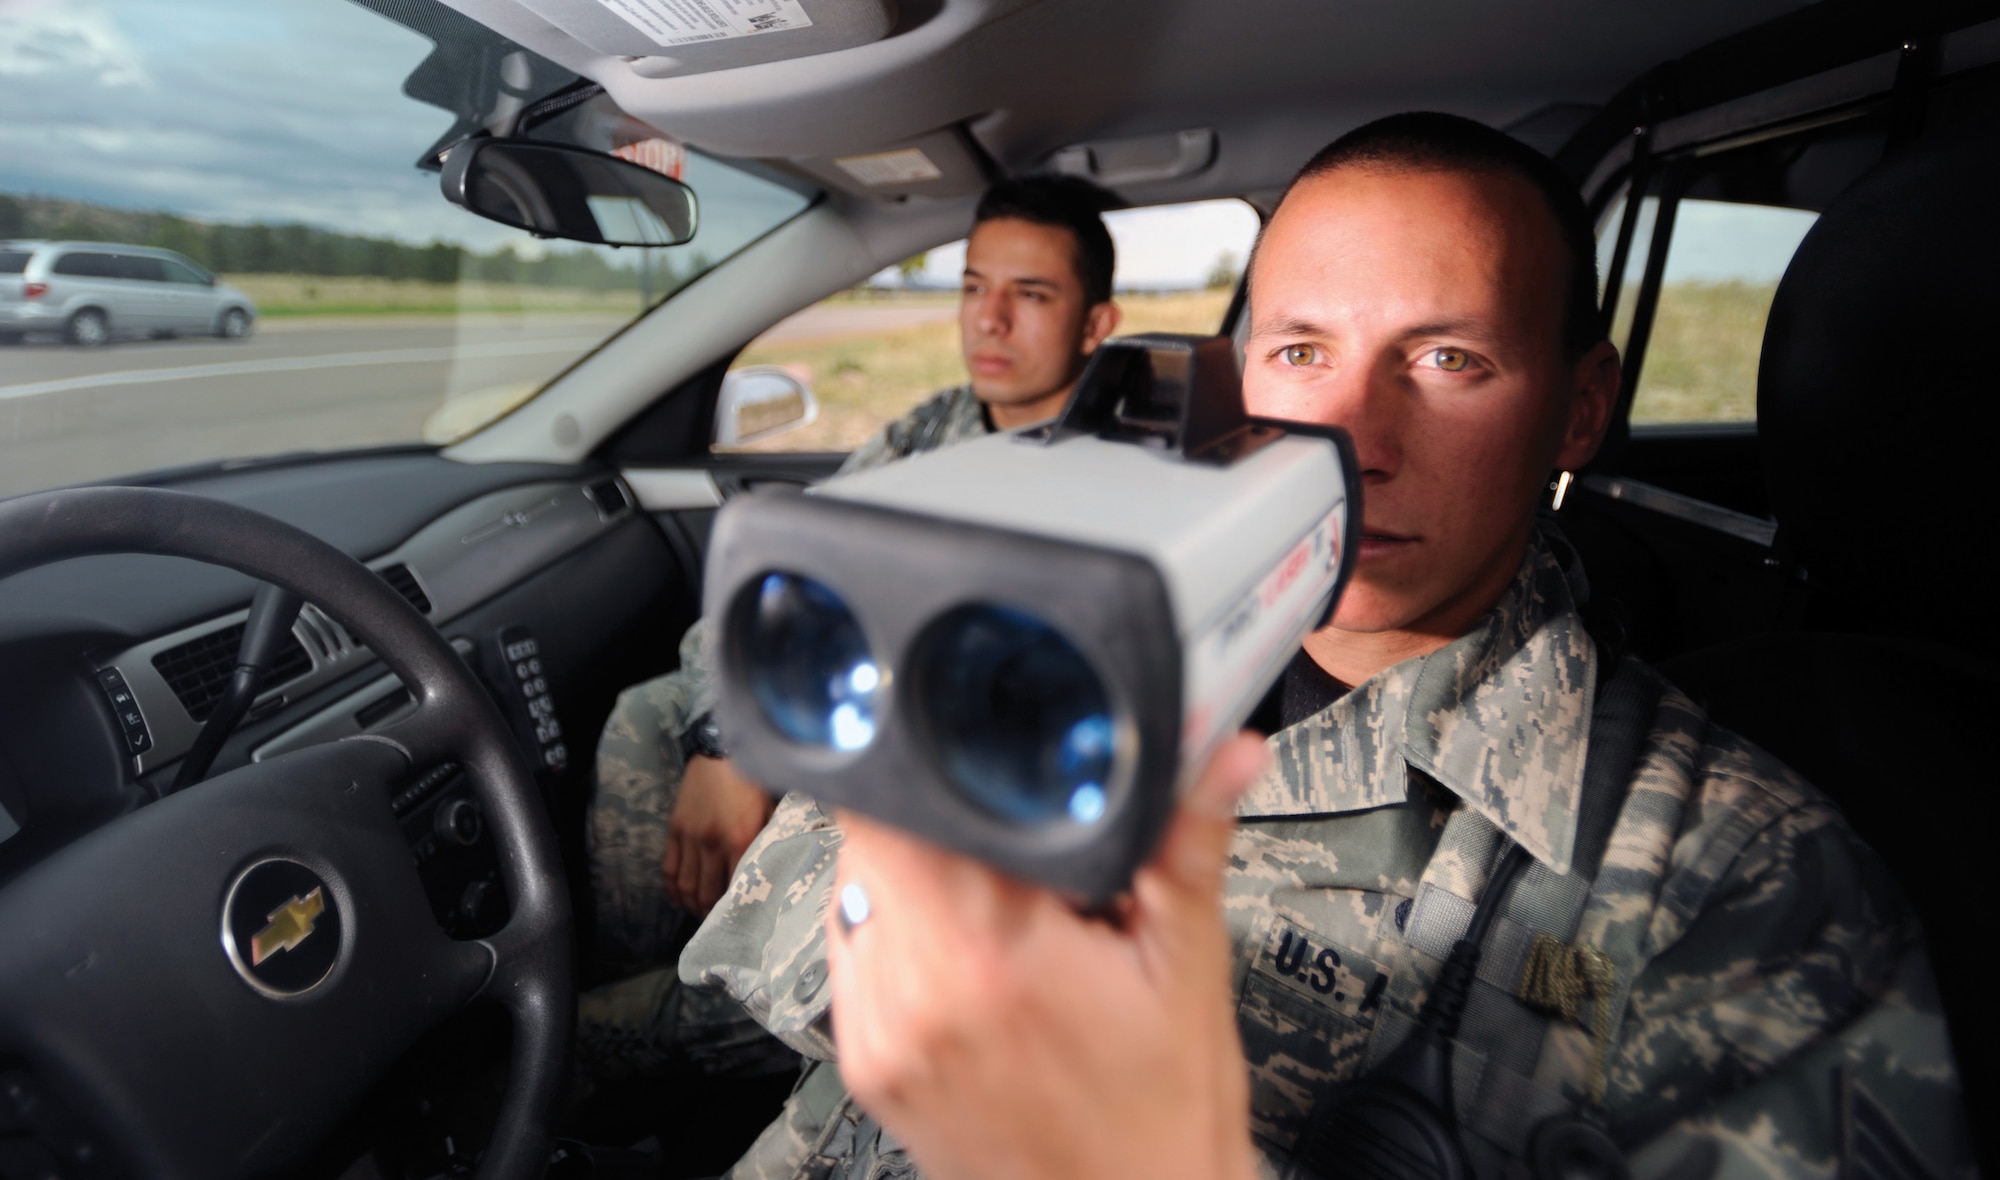 Senior Airman Brandon Aguirre (foreground) and Airman 1st Class Hans Castillo, patrollers with the 10th Security Forces Squadron, monitor drivers on South Gate Boulevard Sept. 26. Getting caught speeding on Academy grounds can be costly. (U.S. Air Force photo/Carol Lawrence)